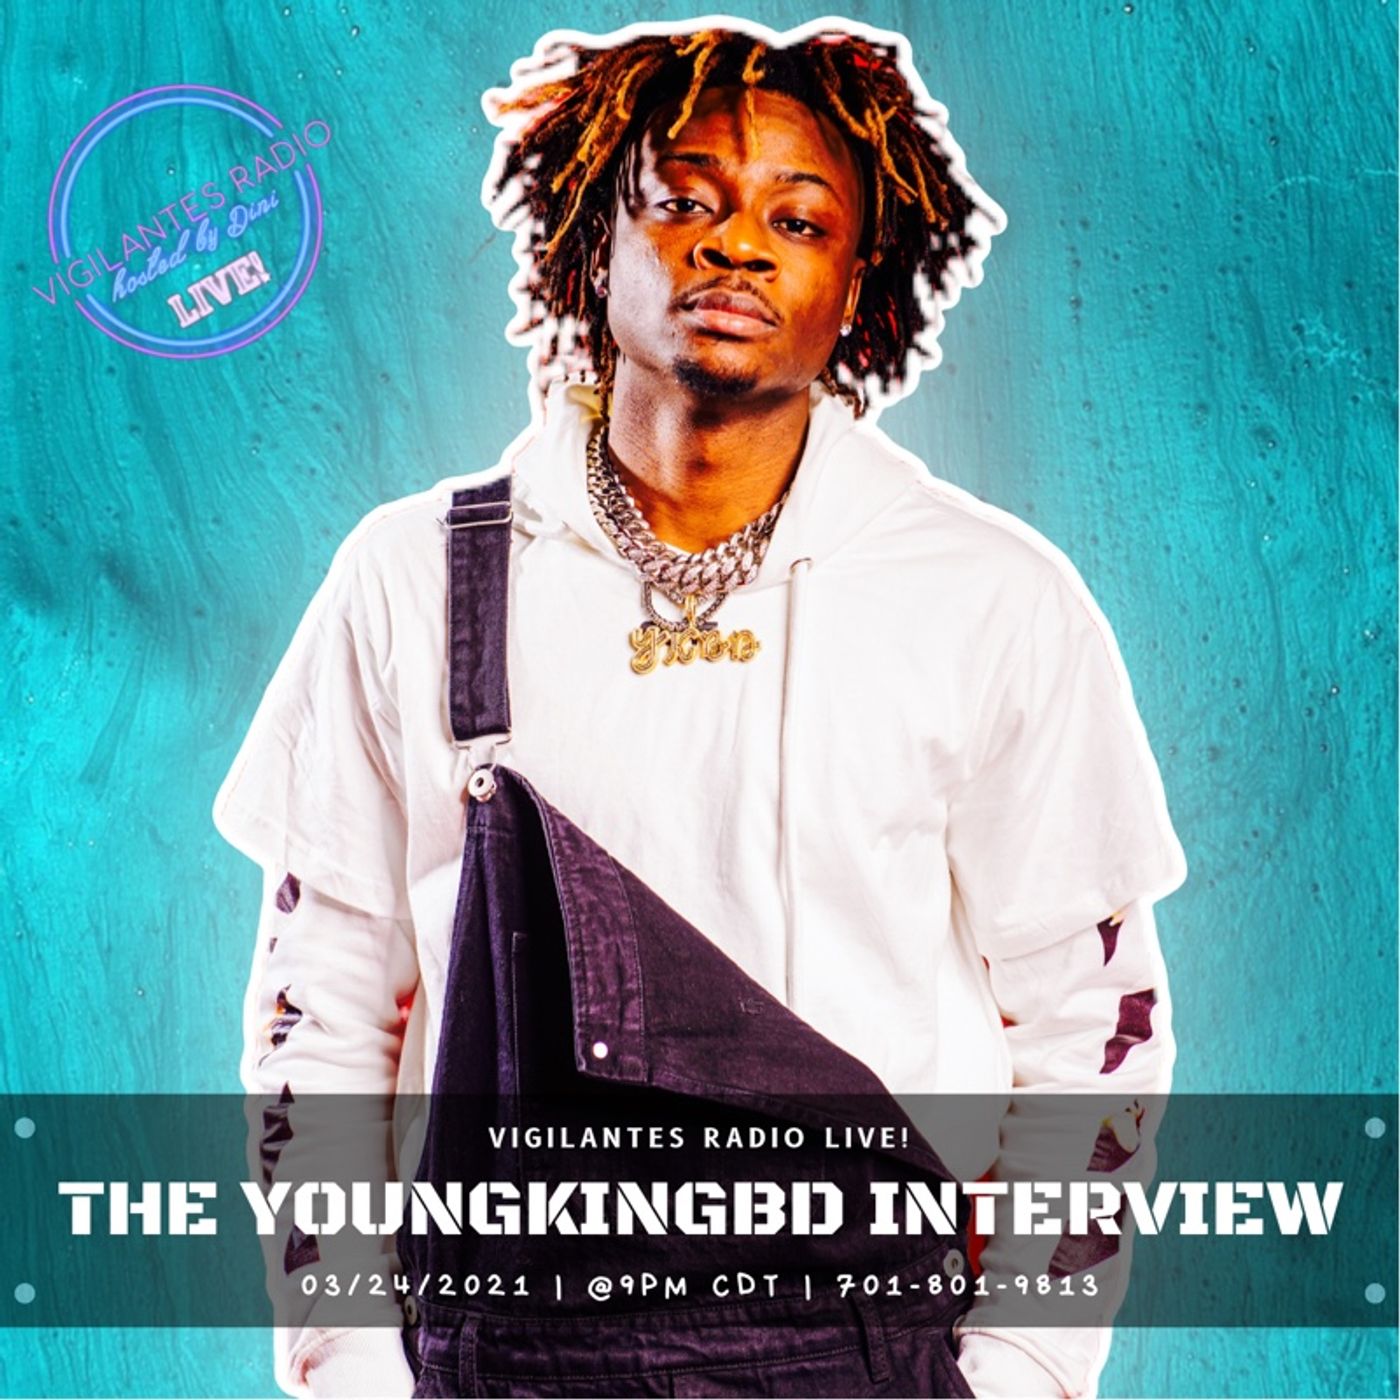 The Youngkingbd Interview. Image